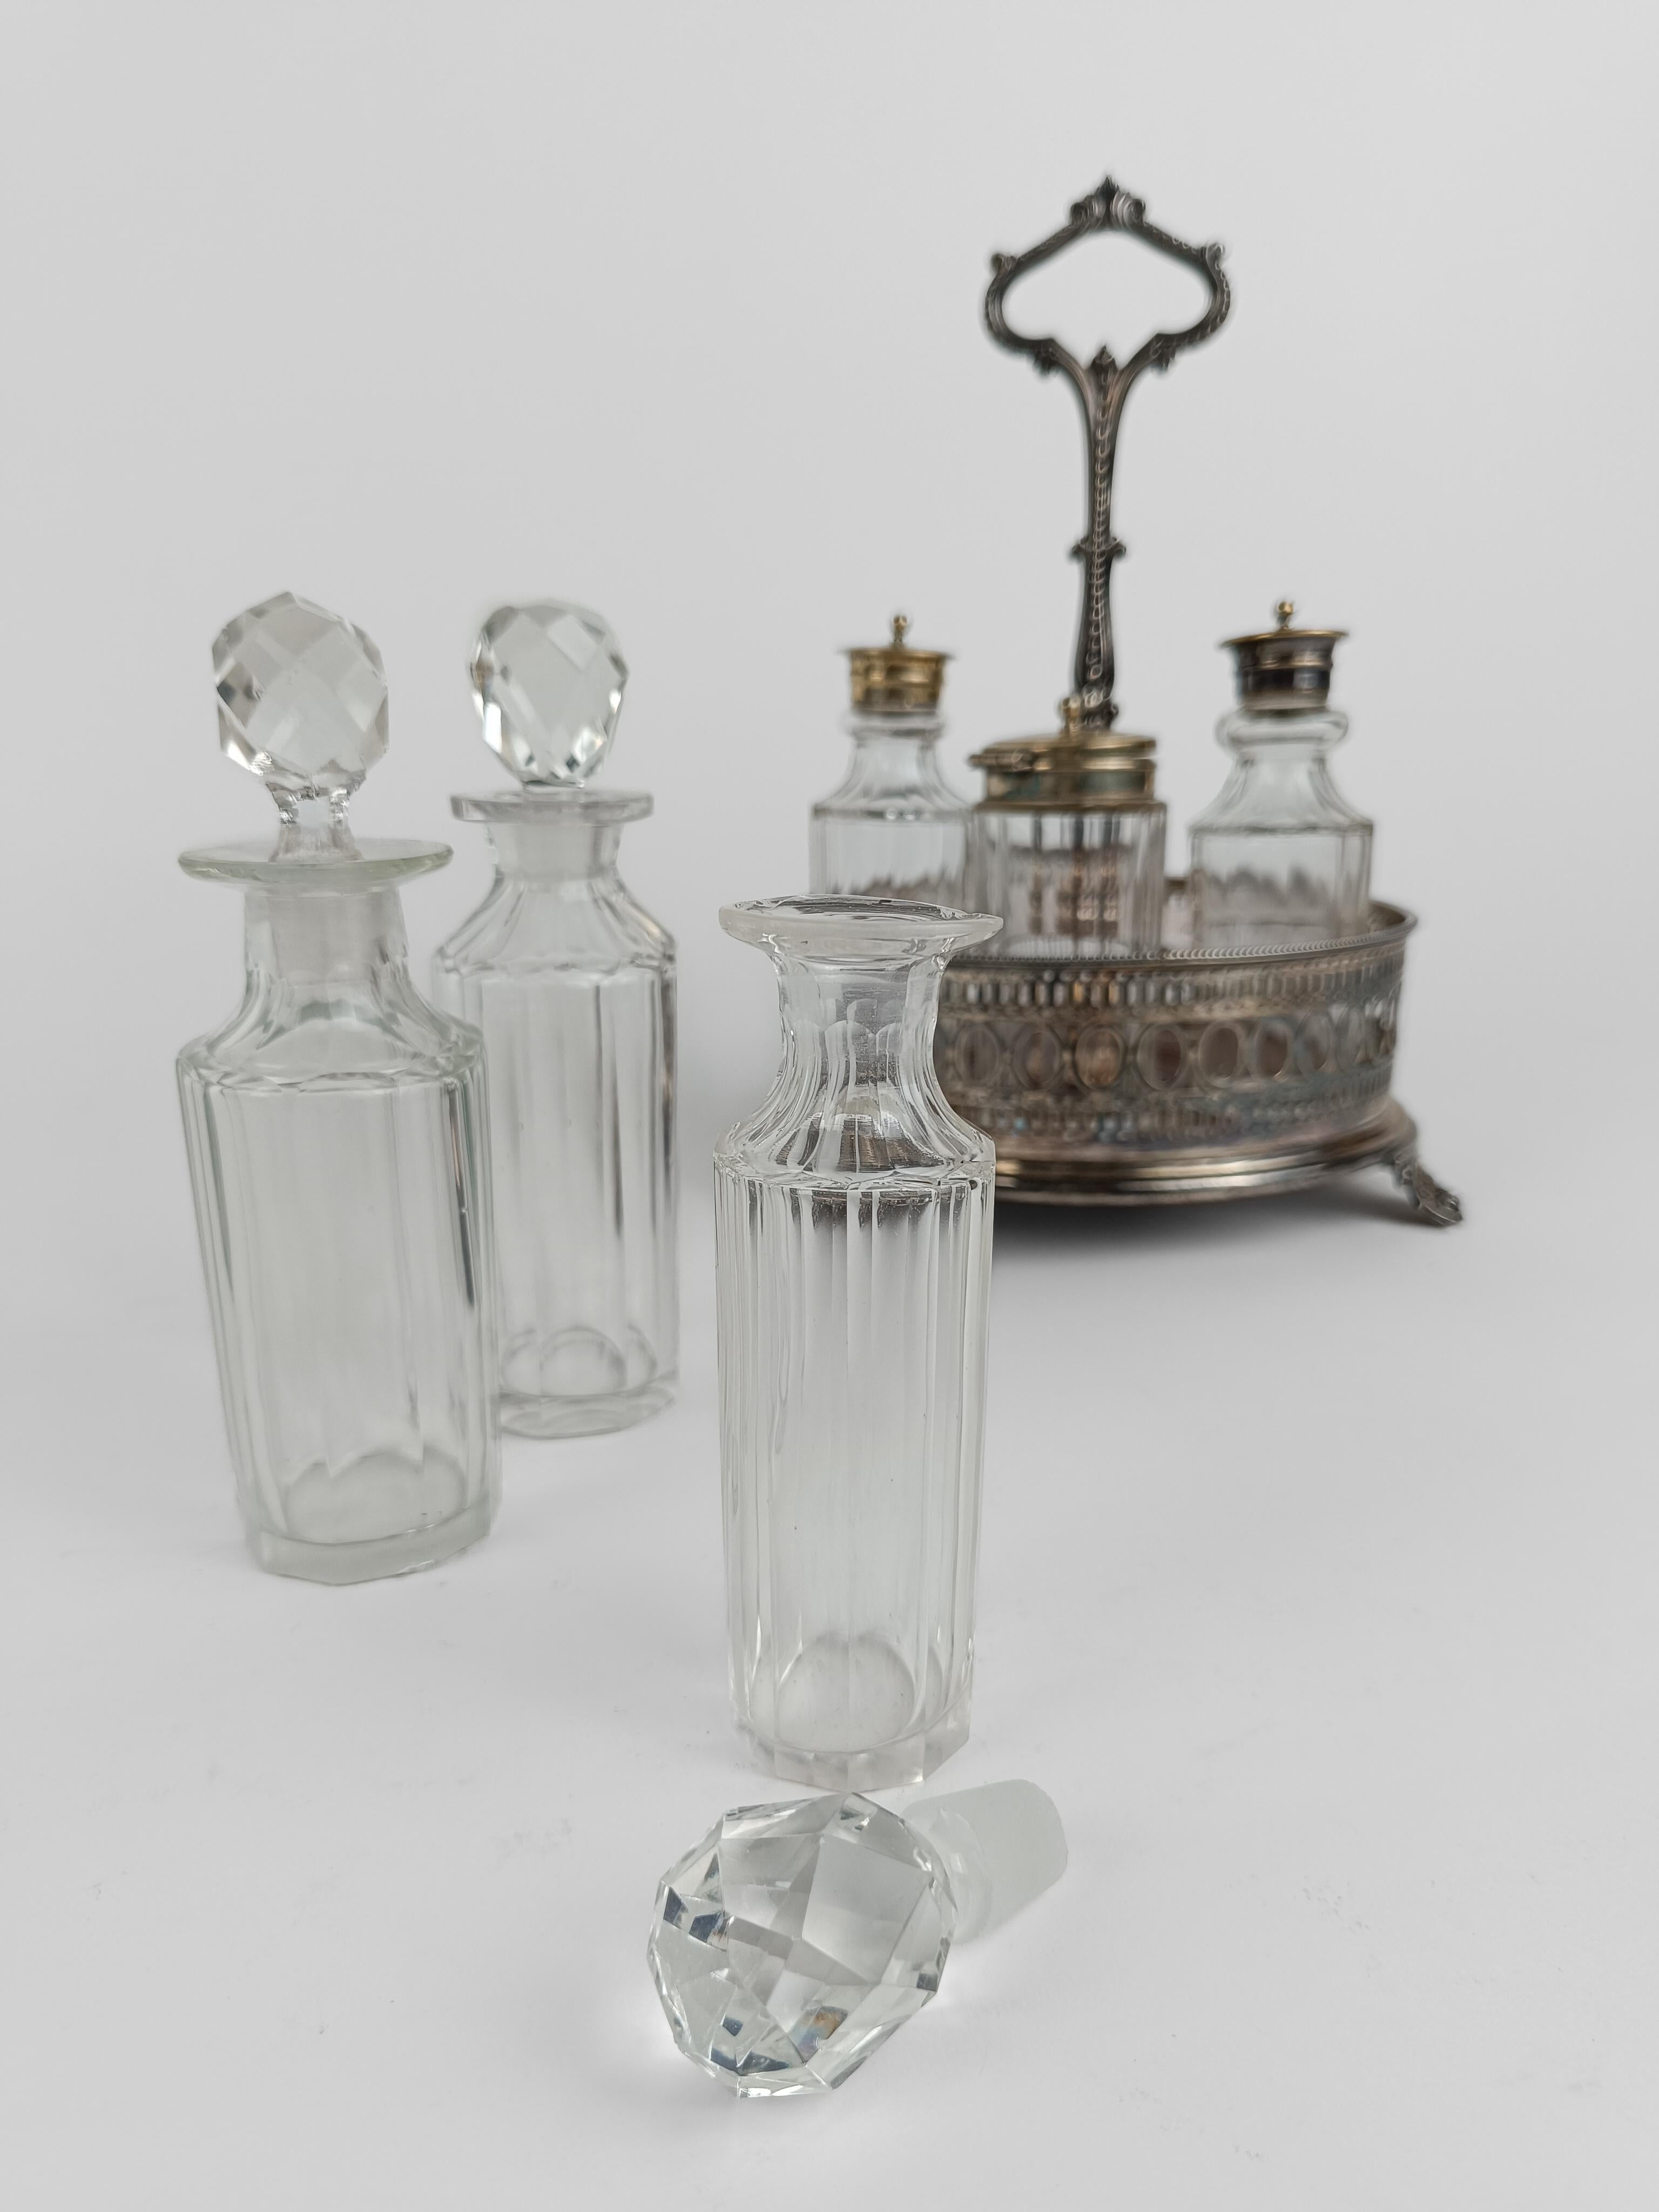 Antique Sheffield England and Silver Plated Cruet Set with Cut Crystal Bottles For Sale 9